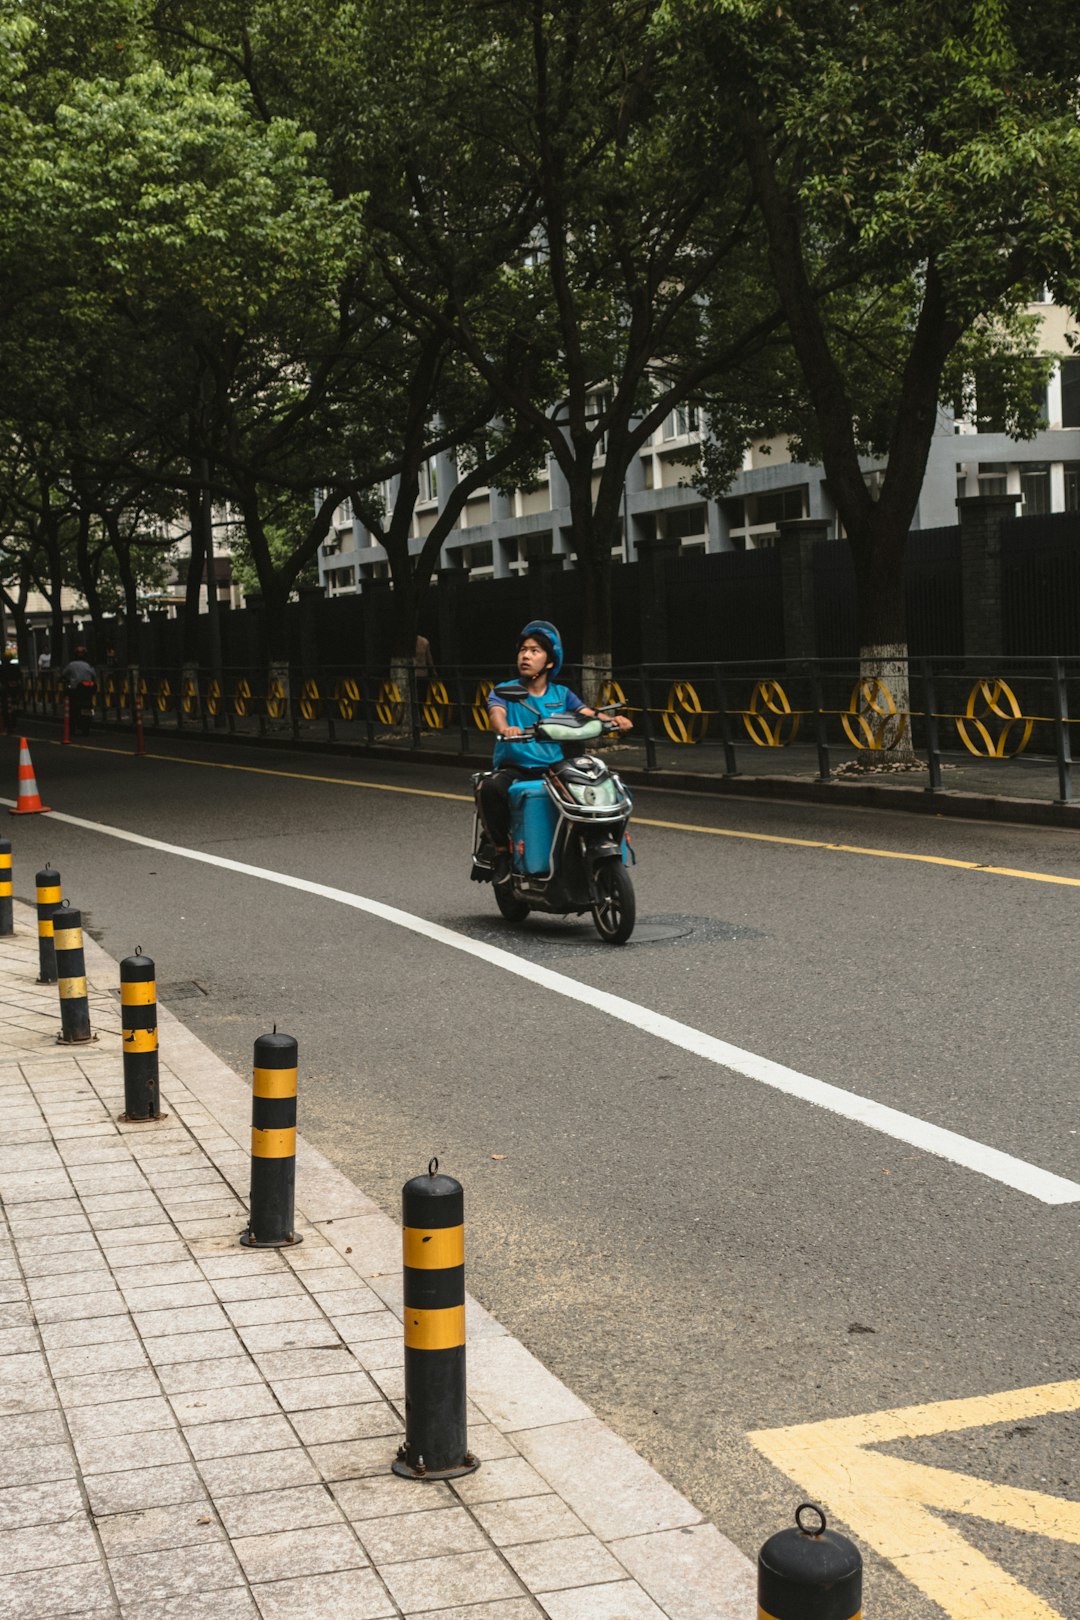 man in green shirt riding on green motorcycle on road during daytime